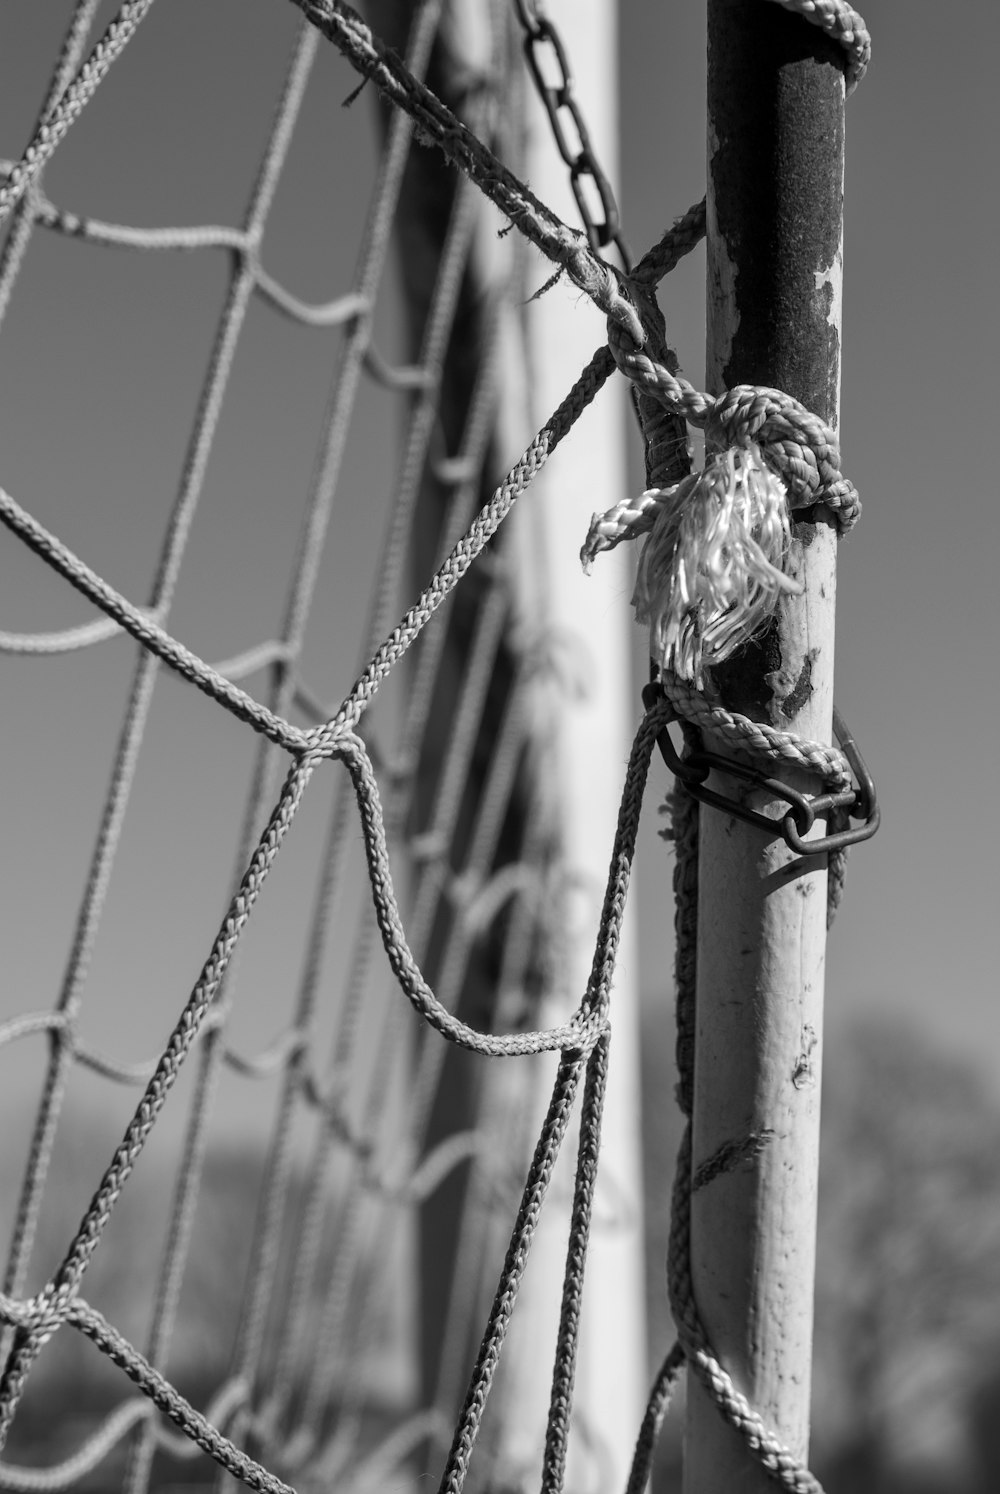 grayscale photo of a rope tied on a wire